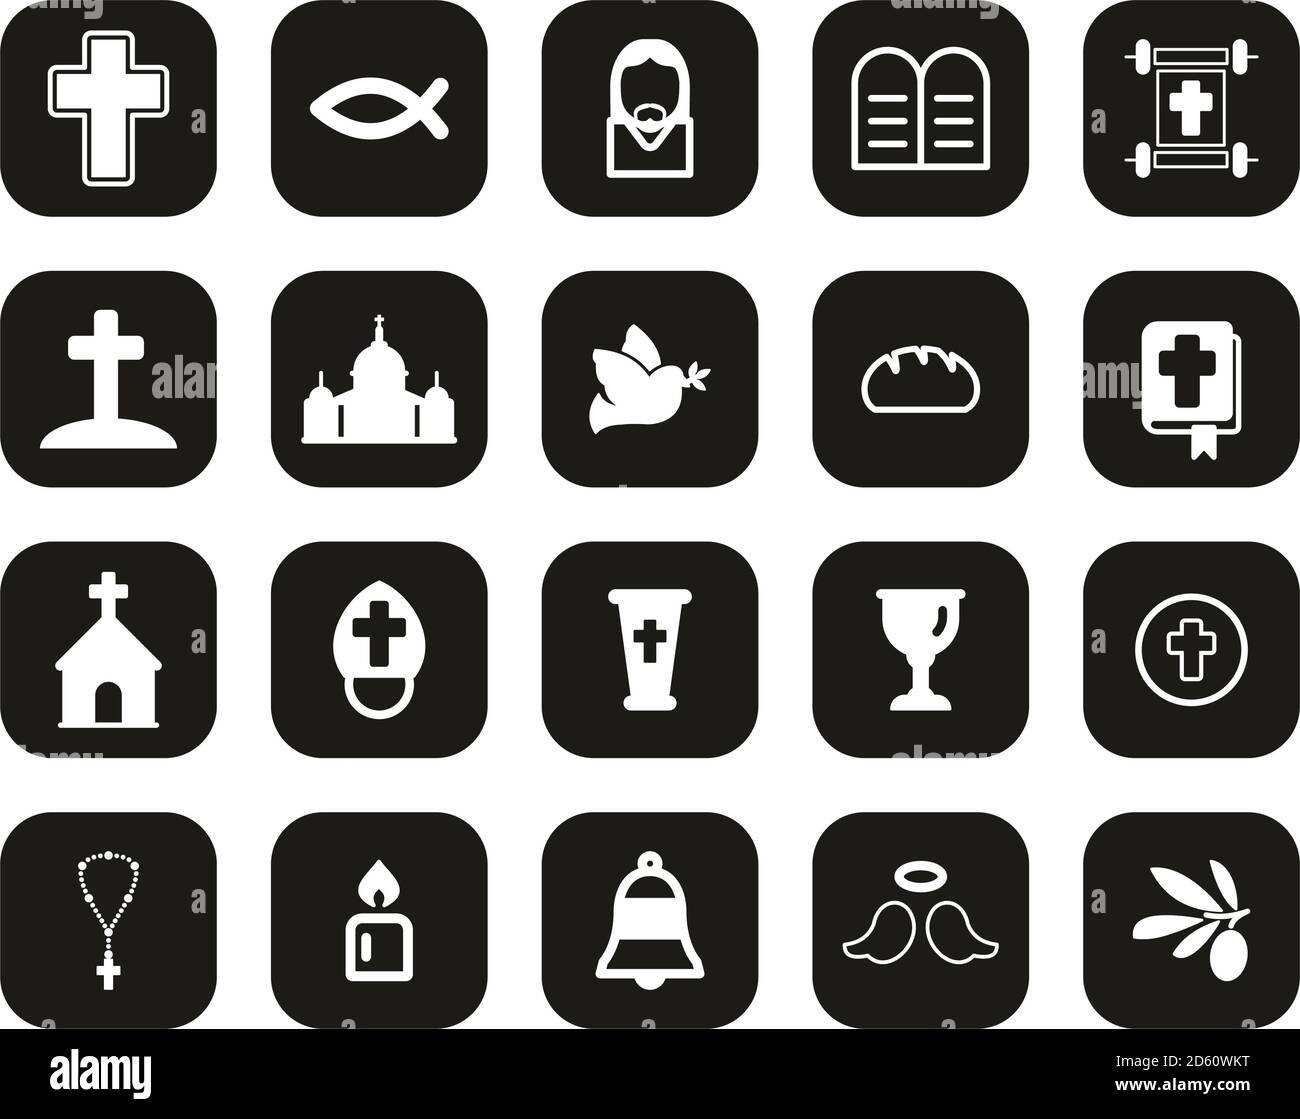 Christianity Religion And Religious Items Icons White On Black Flat